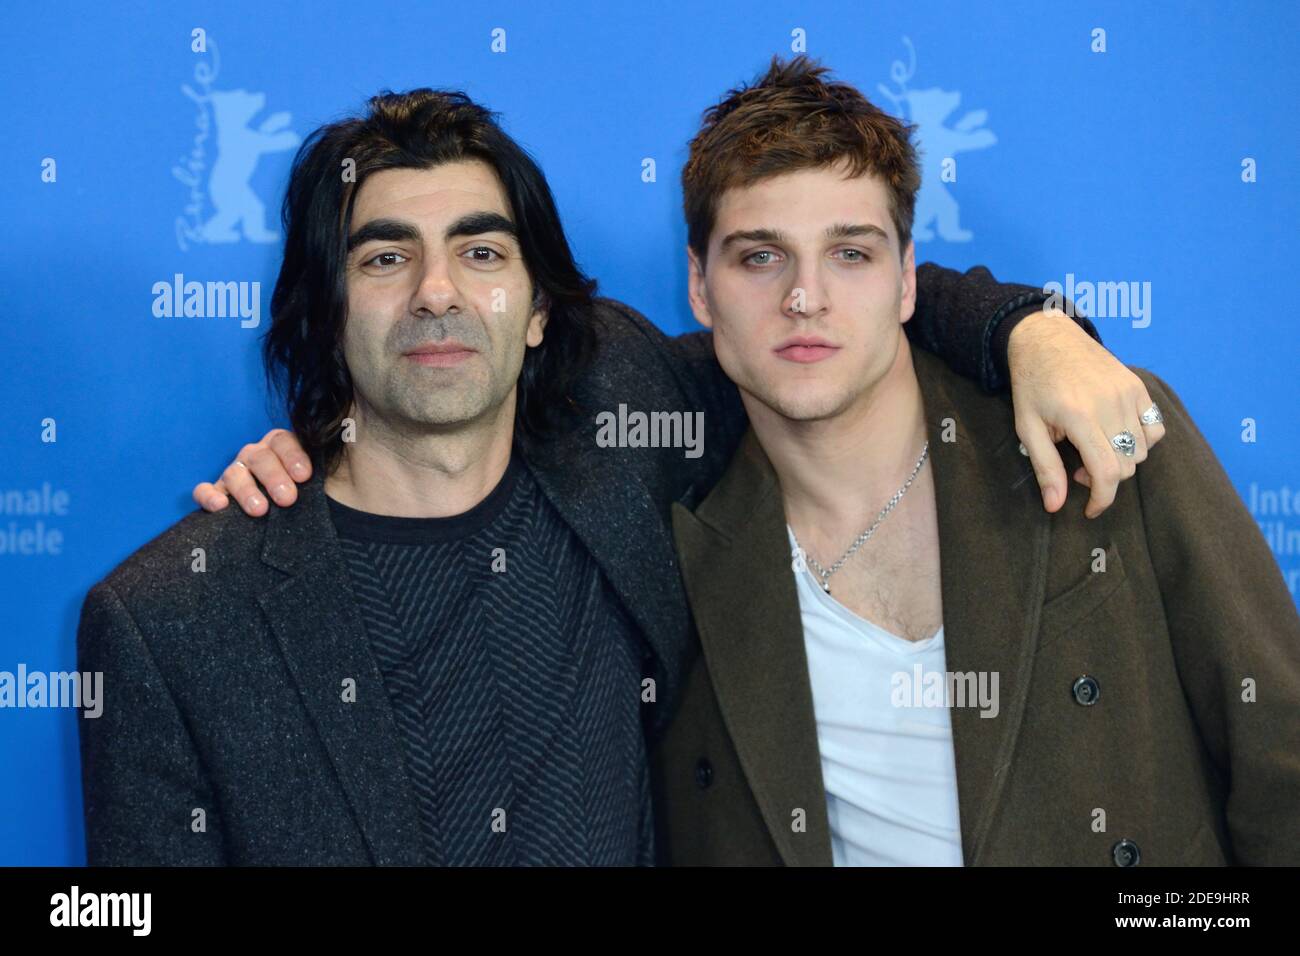 Fatih Akin and Jonas Dassler attending The Golden Glove Photocall as part of the 69th Berlin International Film Festival (Berlinale) in Berlin, Germany on February 09, 2019. Photo by Aurore Marechal/ABACAPRESS.COM Stock Photo